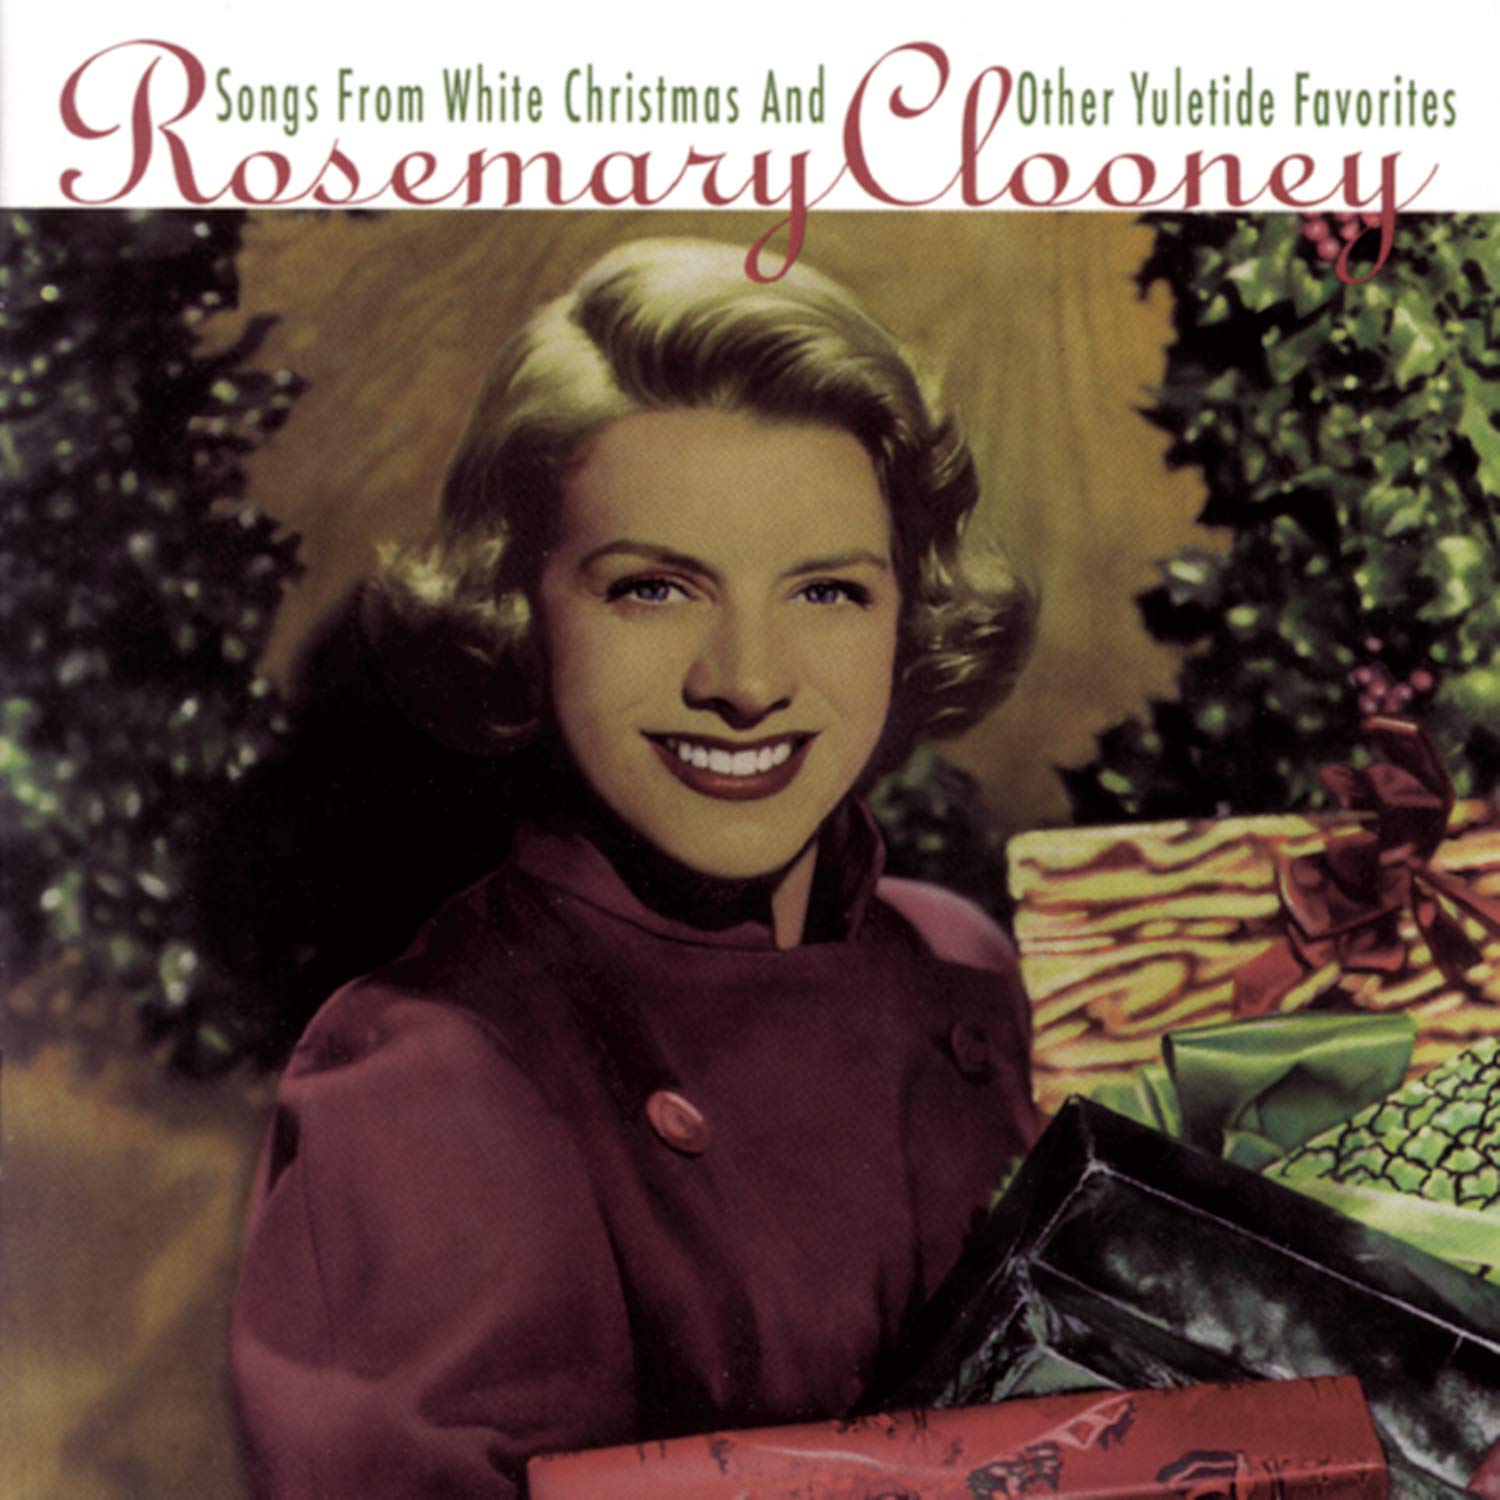 Rosemary Clooney- Songs From White Christmas And Other Yuletide Favorites